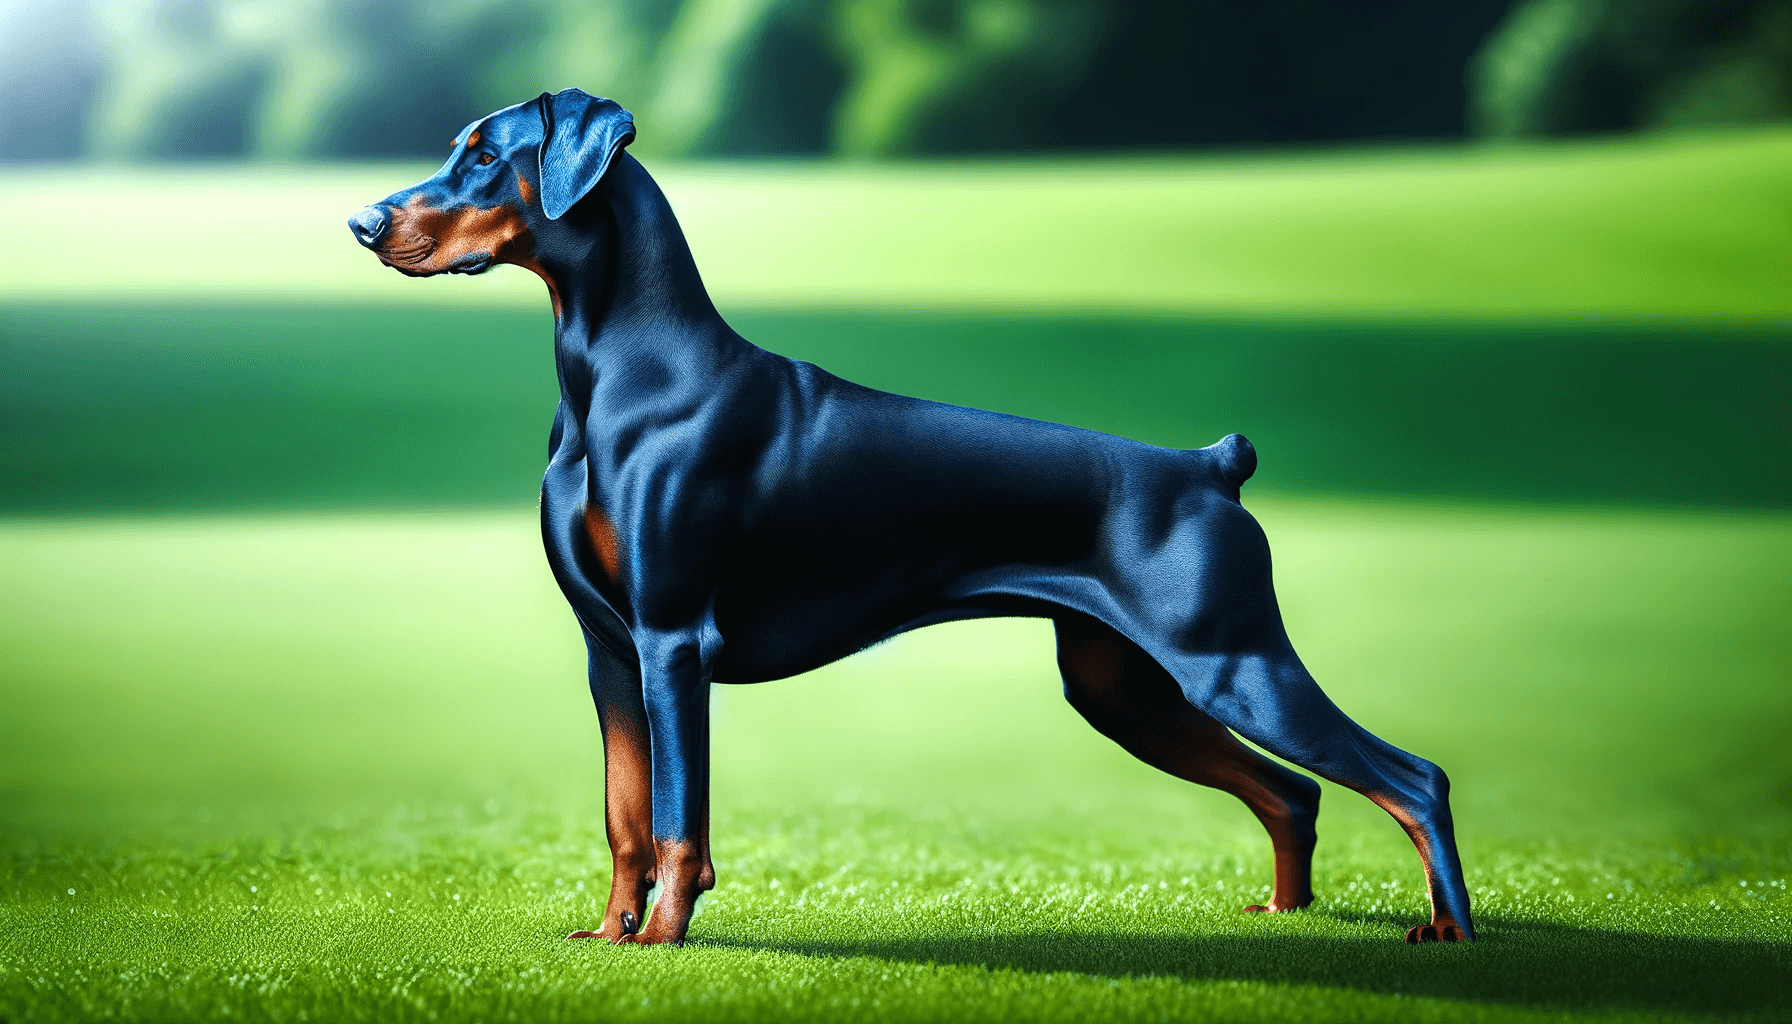 A Blue Doberman in a profile stance on a green lawn, showcasing its sleek body, athletic build, and the distinct blue sheen of its coat.